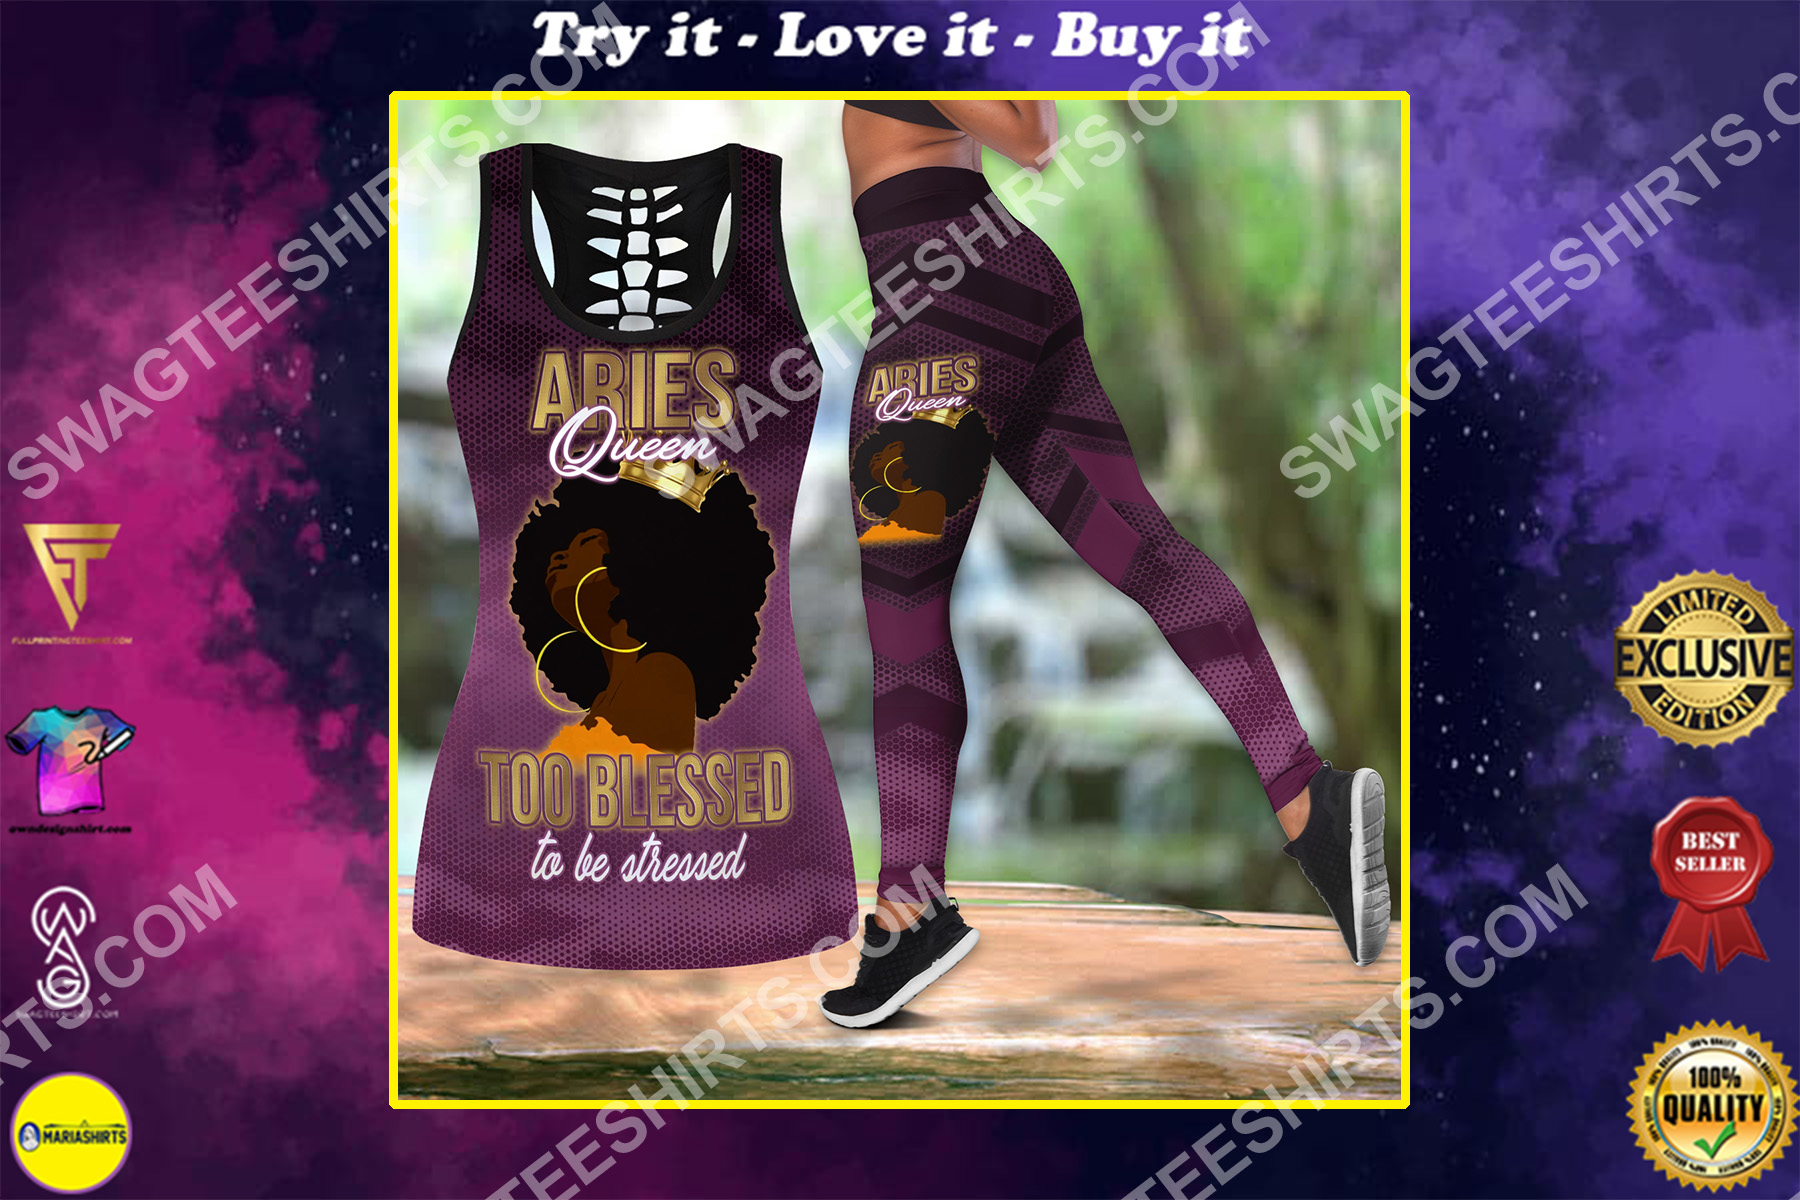 aries queen too blessed to be stressed birthday gift set sports outfit